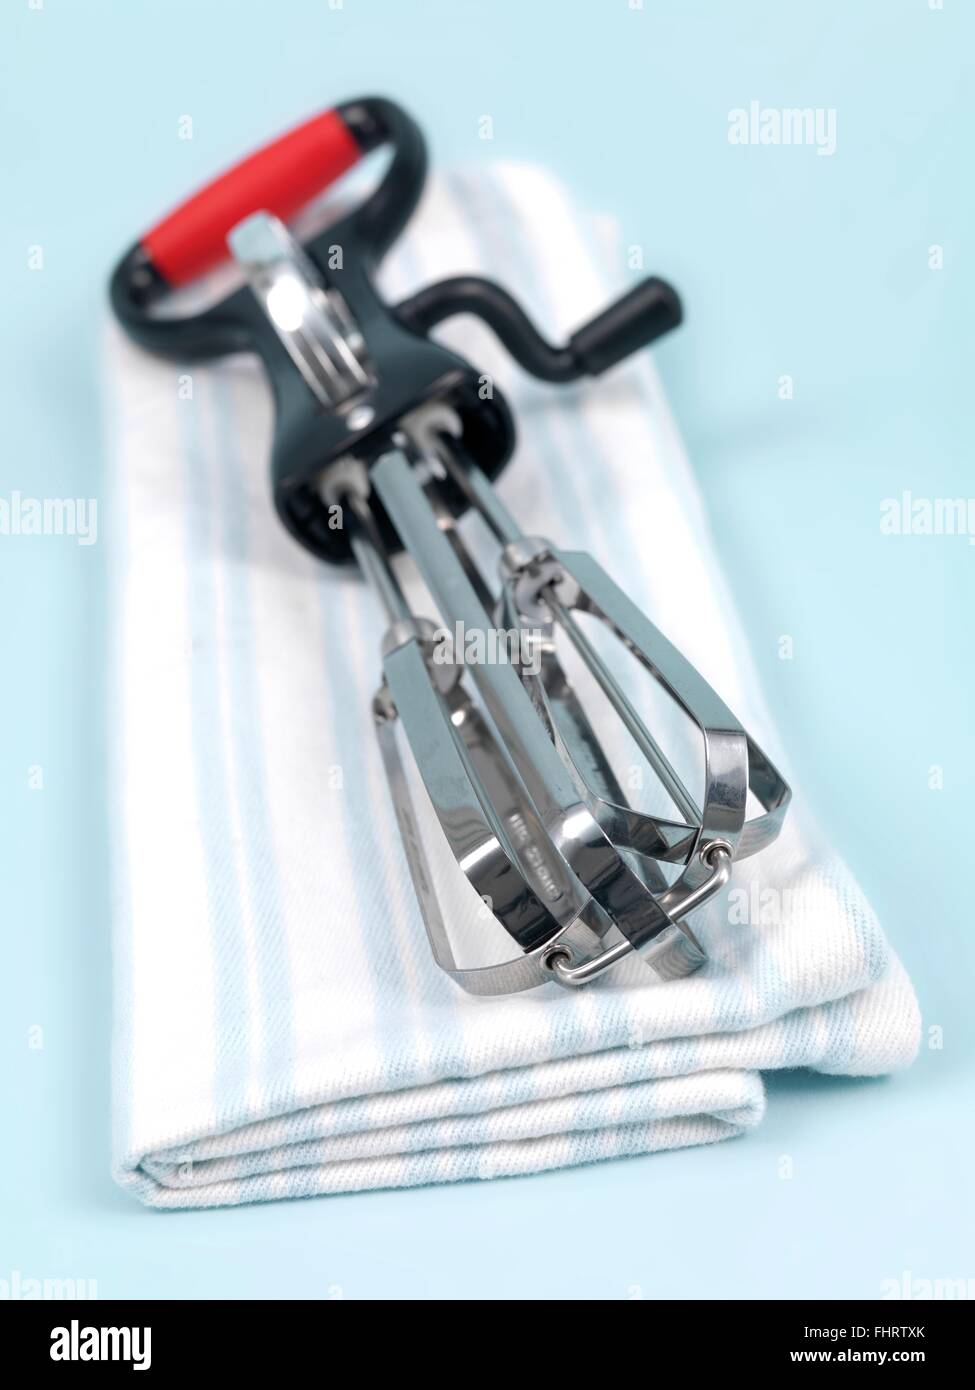 An egg beater on a kitchen bench Stock Photo